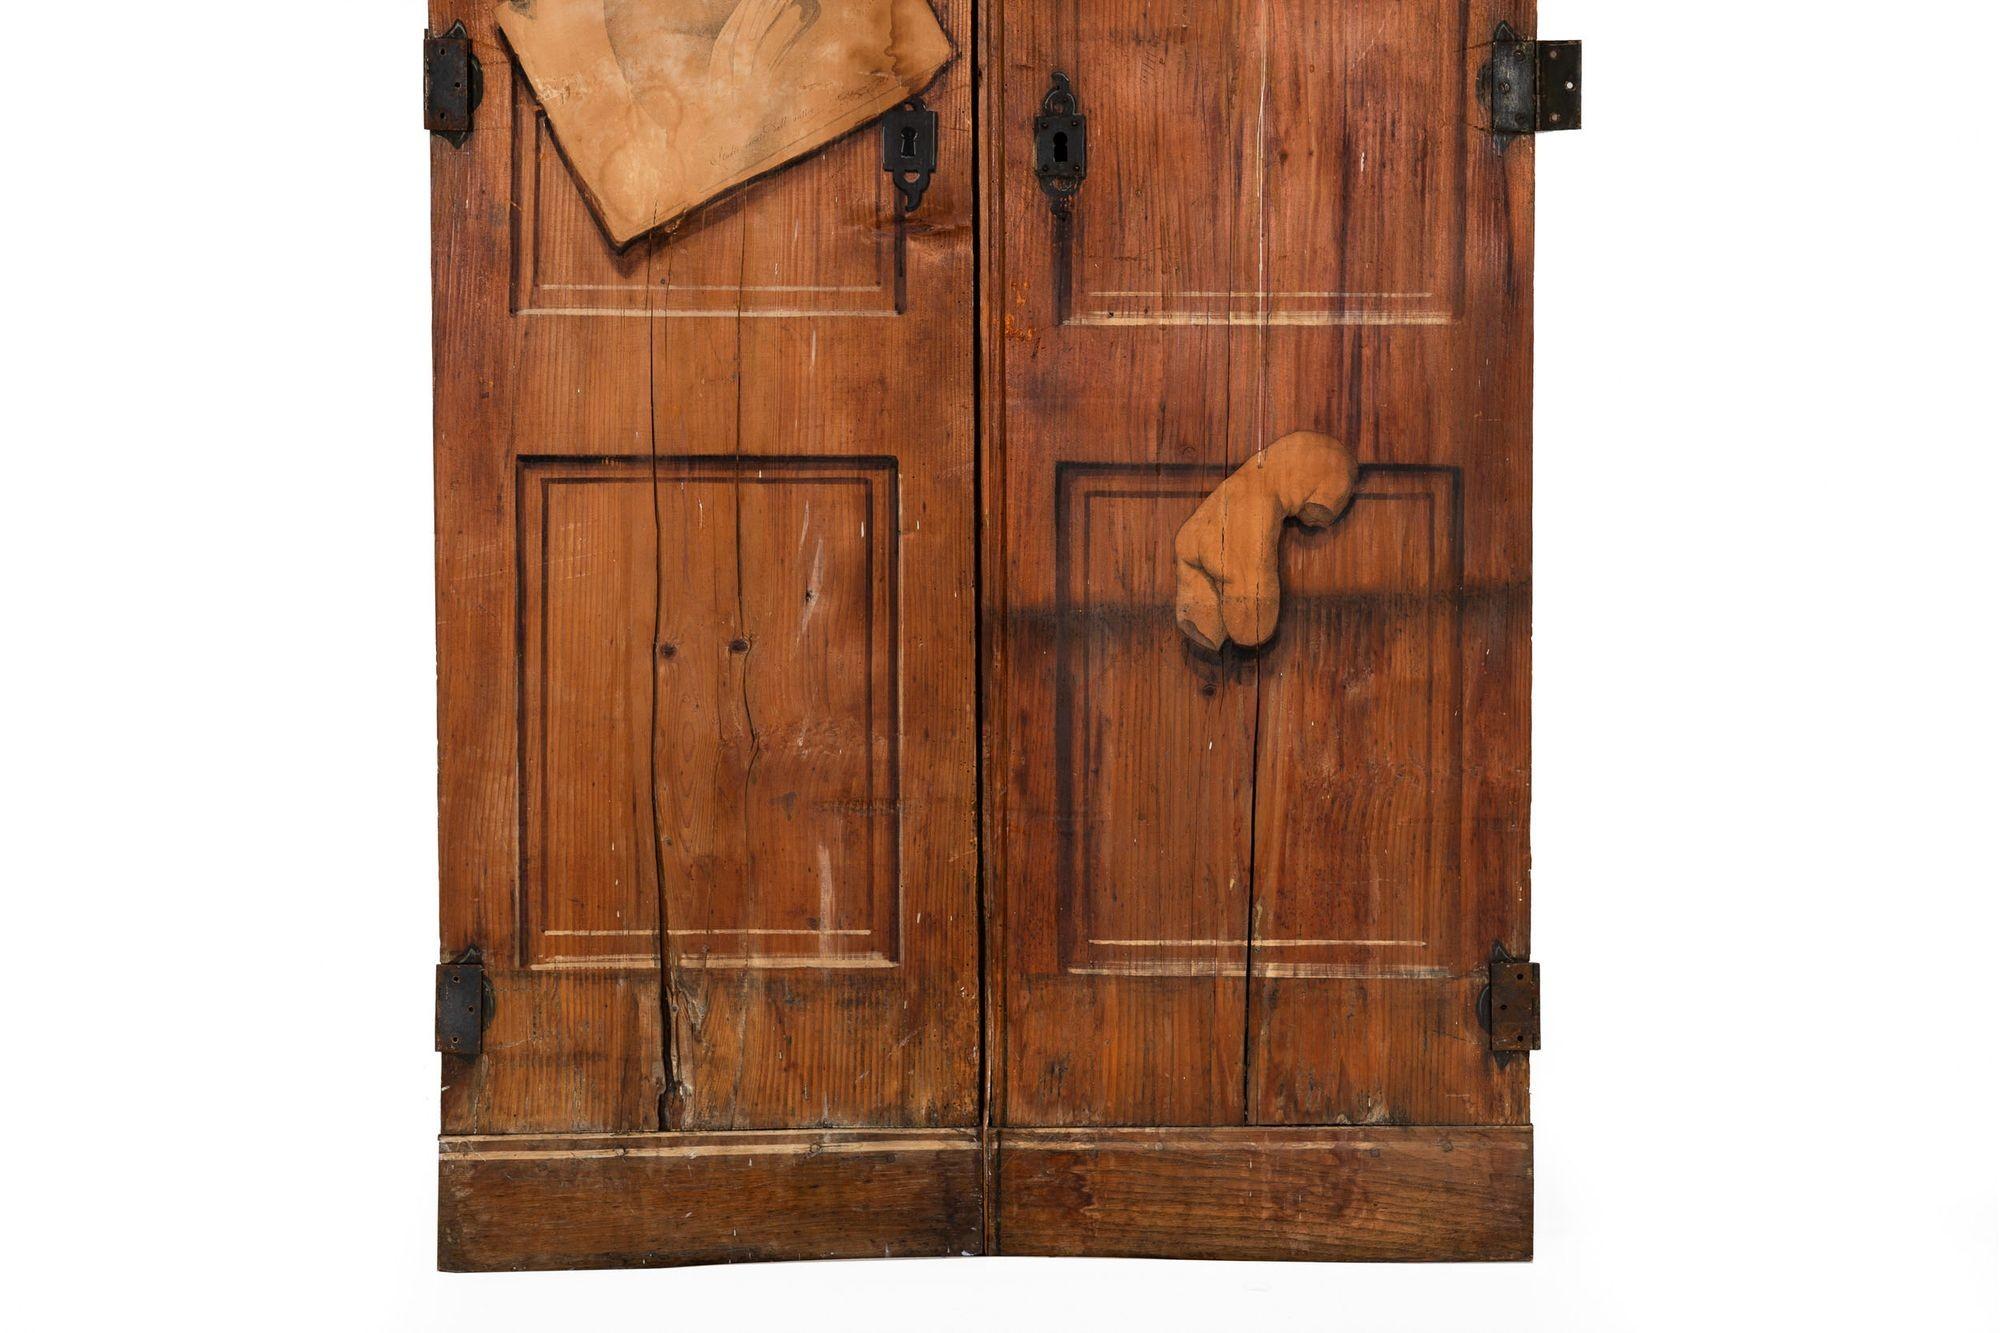 French Provincial 19th Century French Antique Scrubbed Pine Trompe L'oeil Decorated Doors For Sale